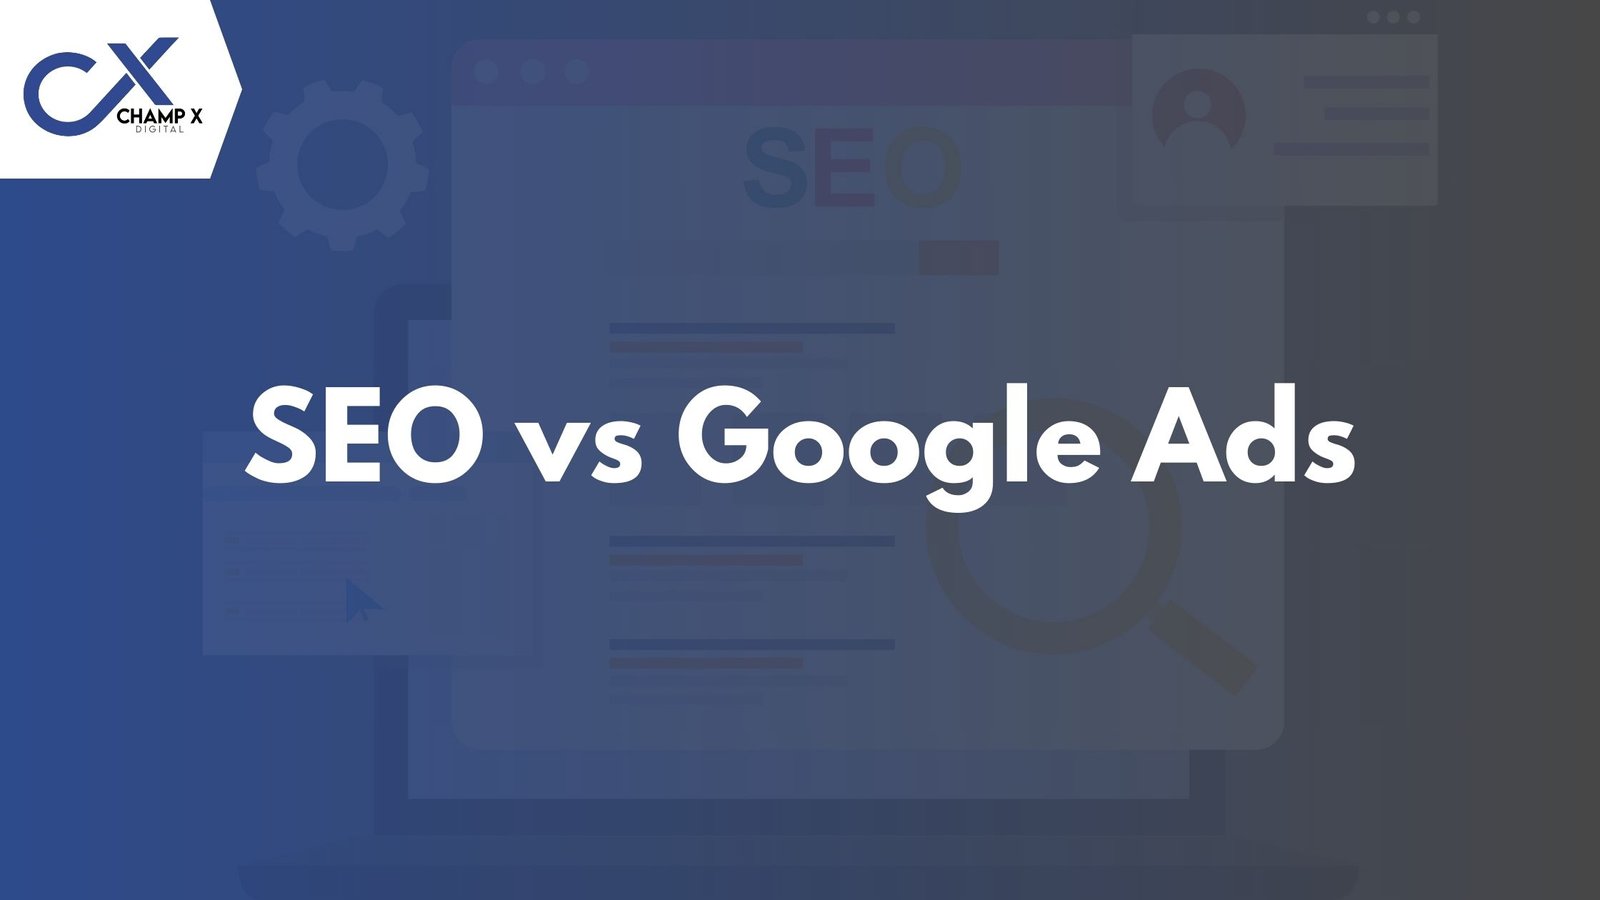 SEO vs Google Ads - Which is Better for Your Business